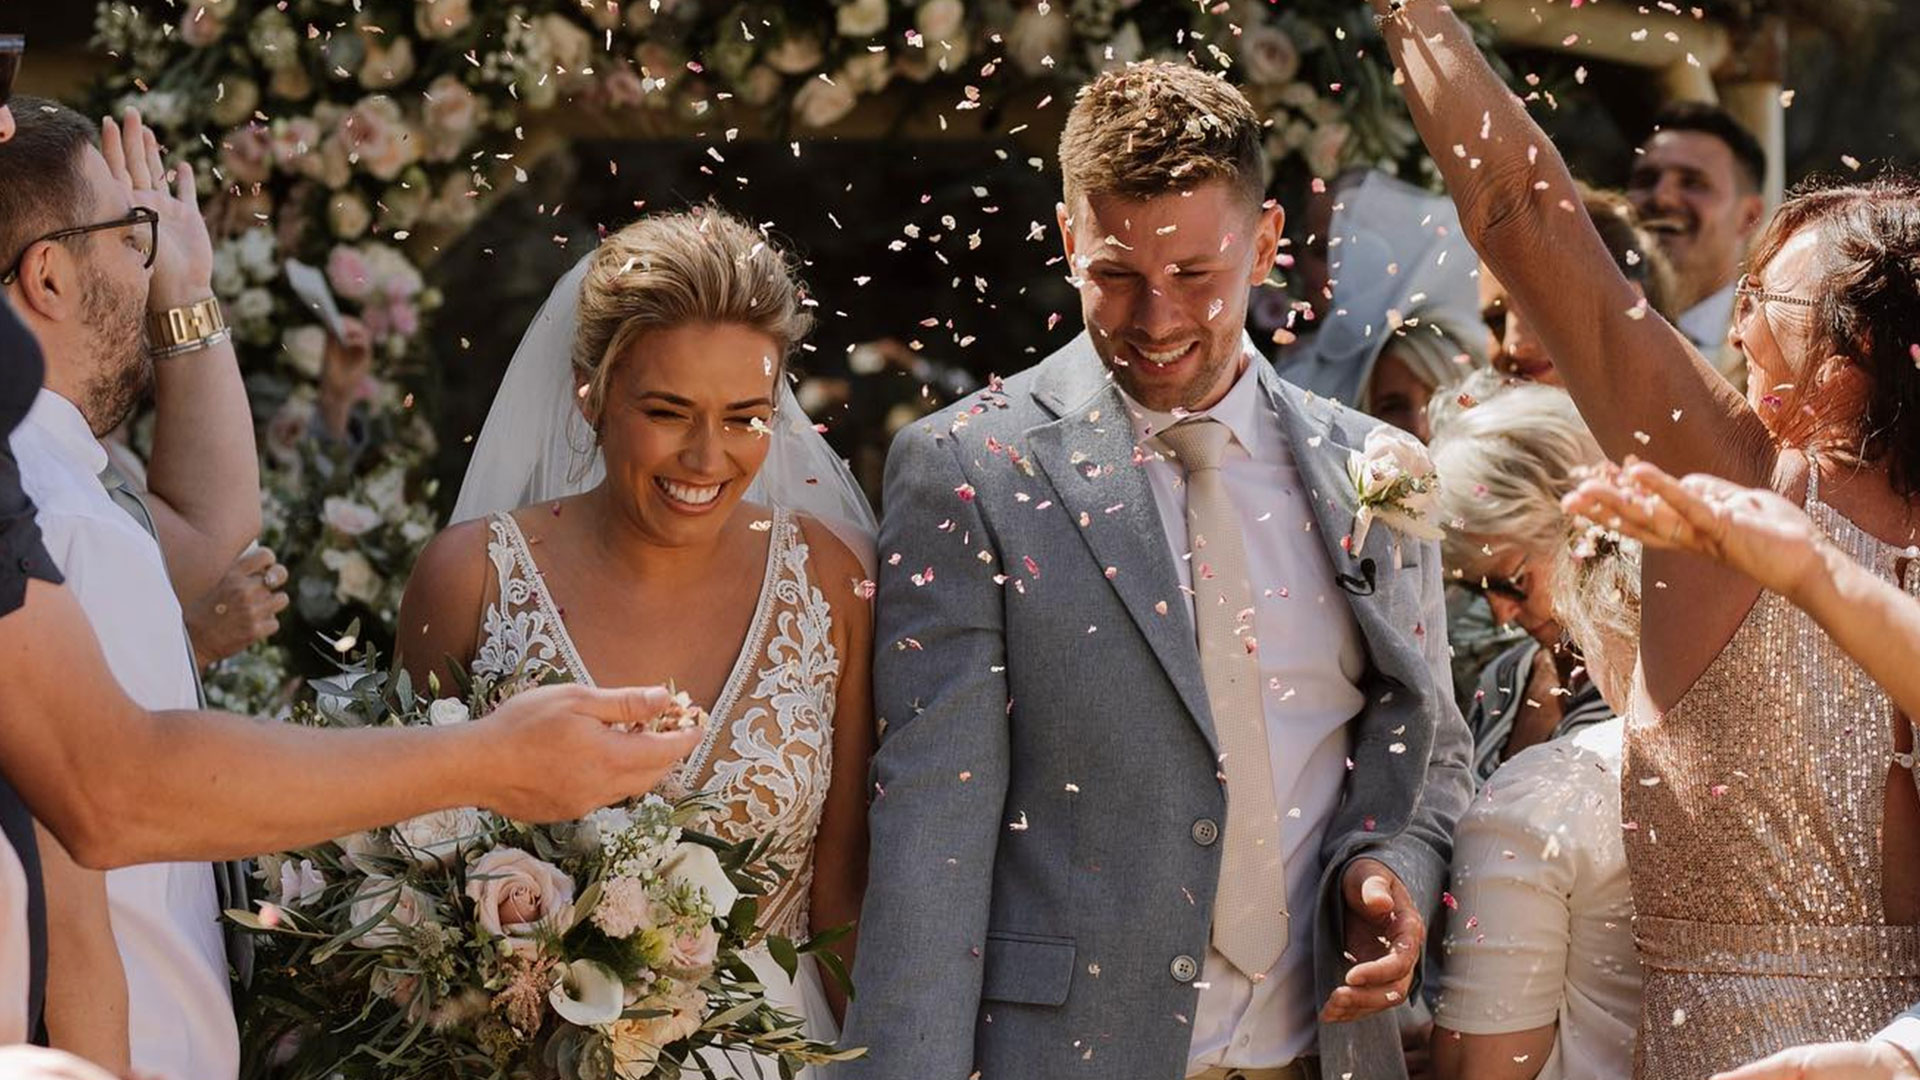 Laura Tott, star of First Dates, shares photos from her first wedding as she celebrates the ‘best day of our lives’